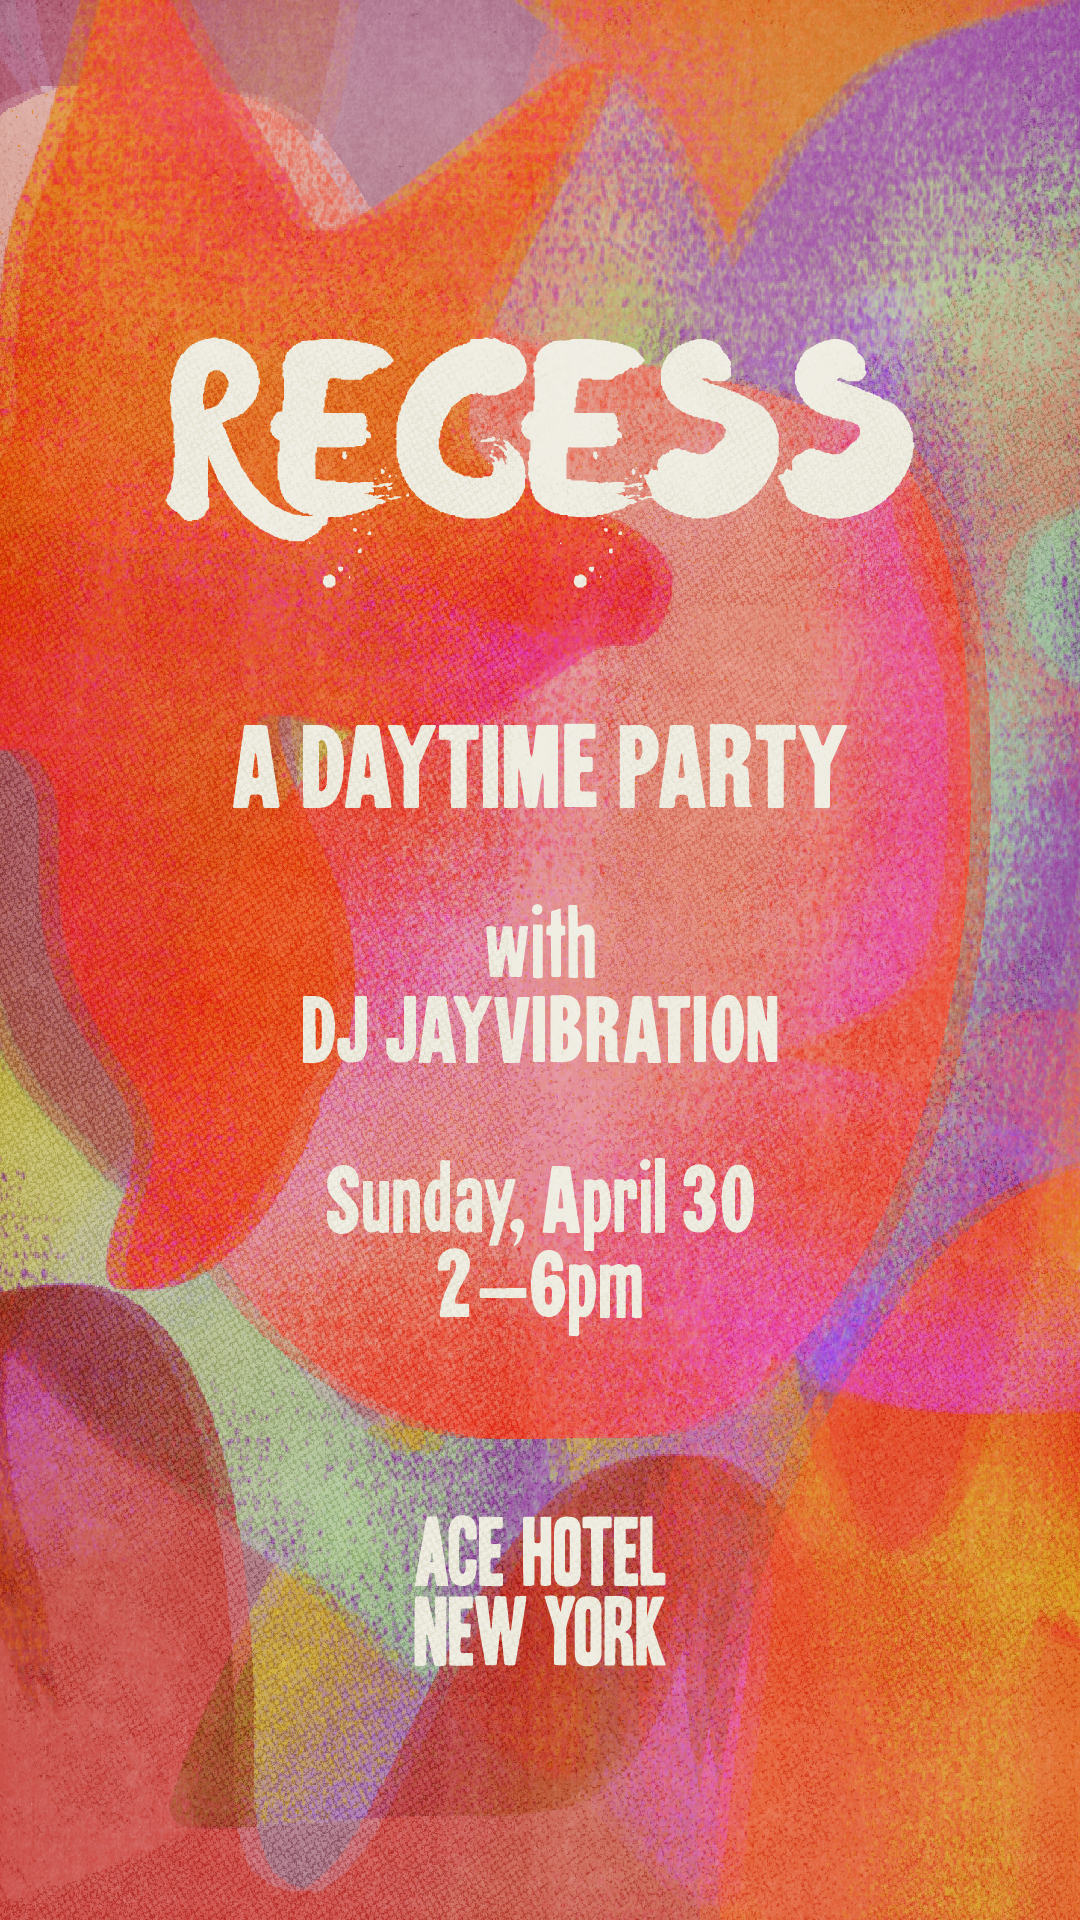 Flyer to promote RECESS Dance Party at Ace Hotel New York